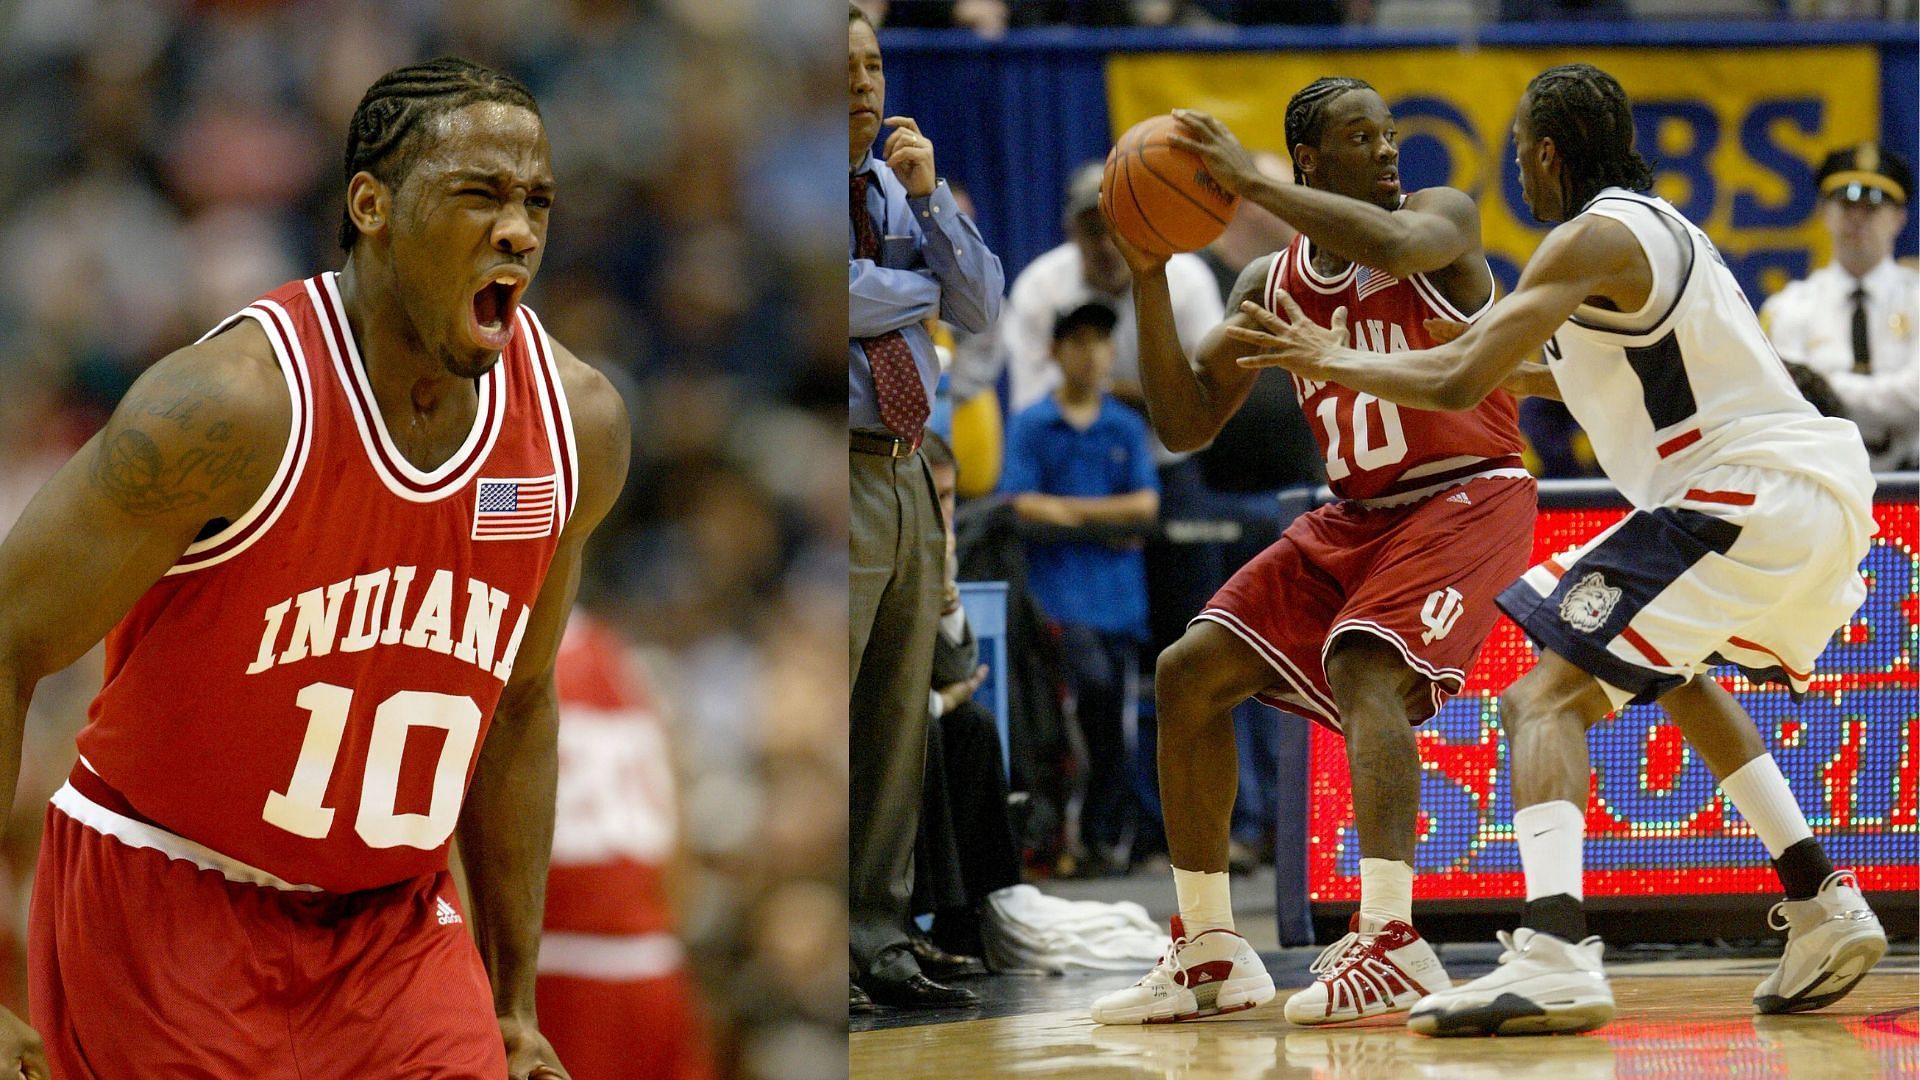 Mont Sports Academy coach Roderick WIlmont used to play for the Indiana Hoosiers from 2002-2007